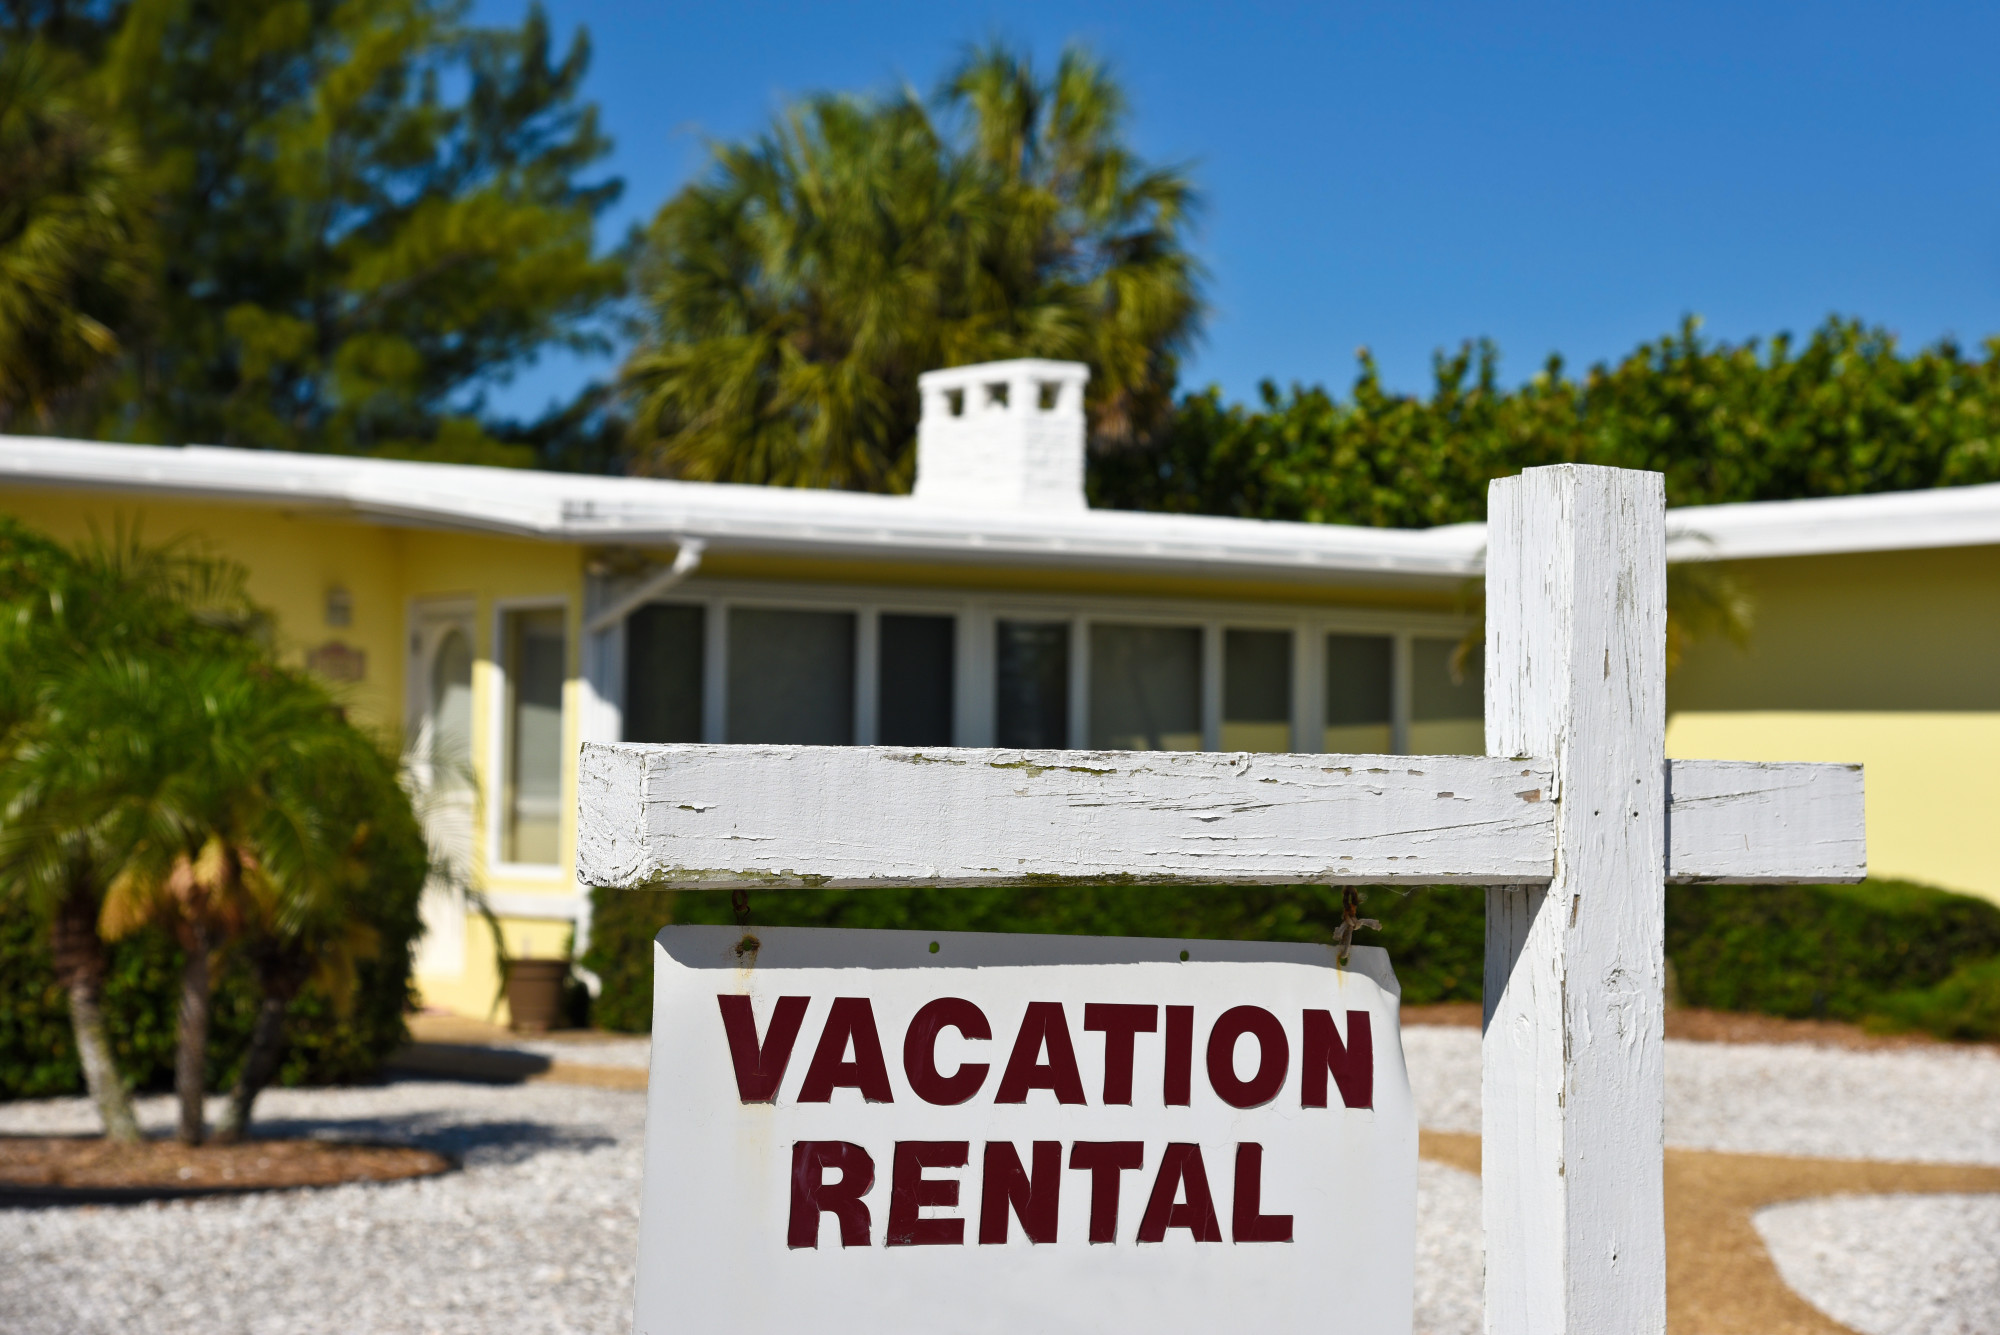 How to Stock Your Vacation Rental for the Perfect Stay